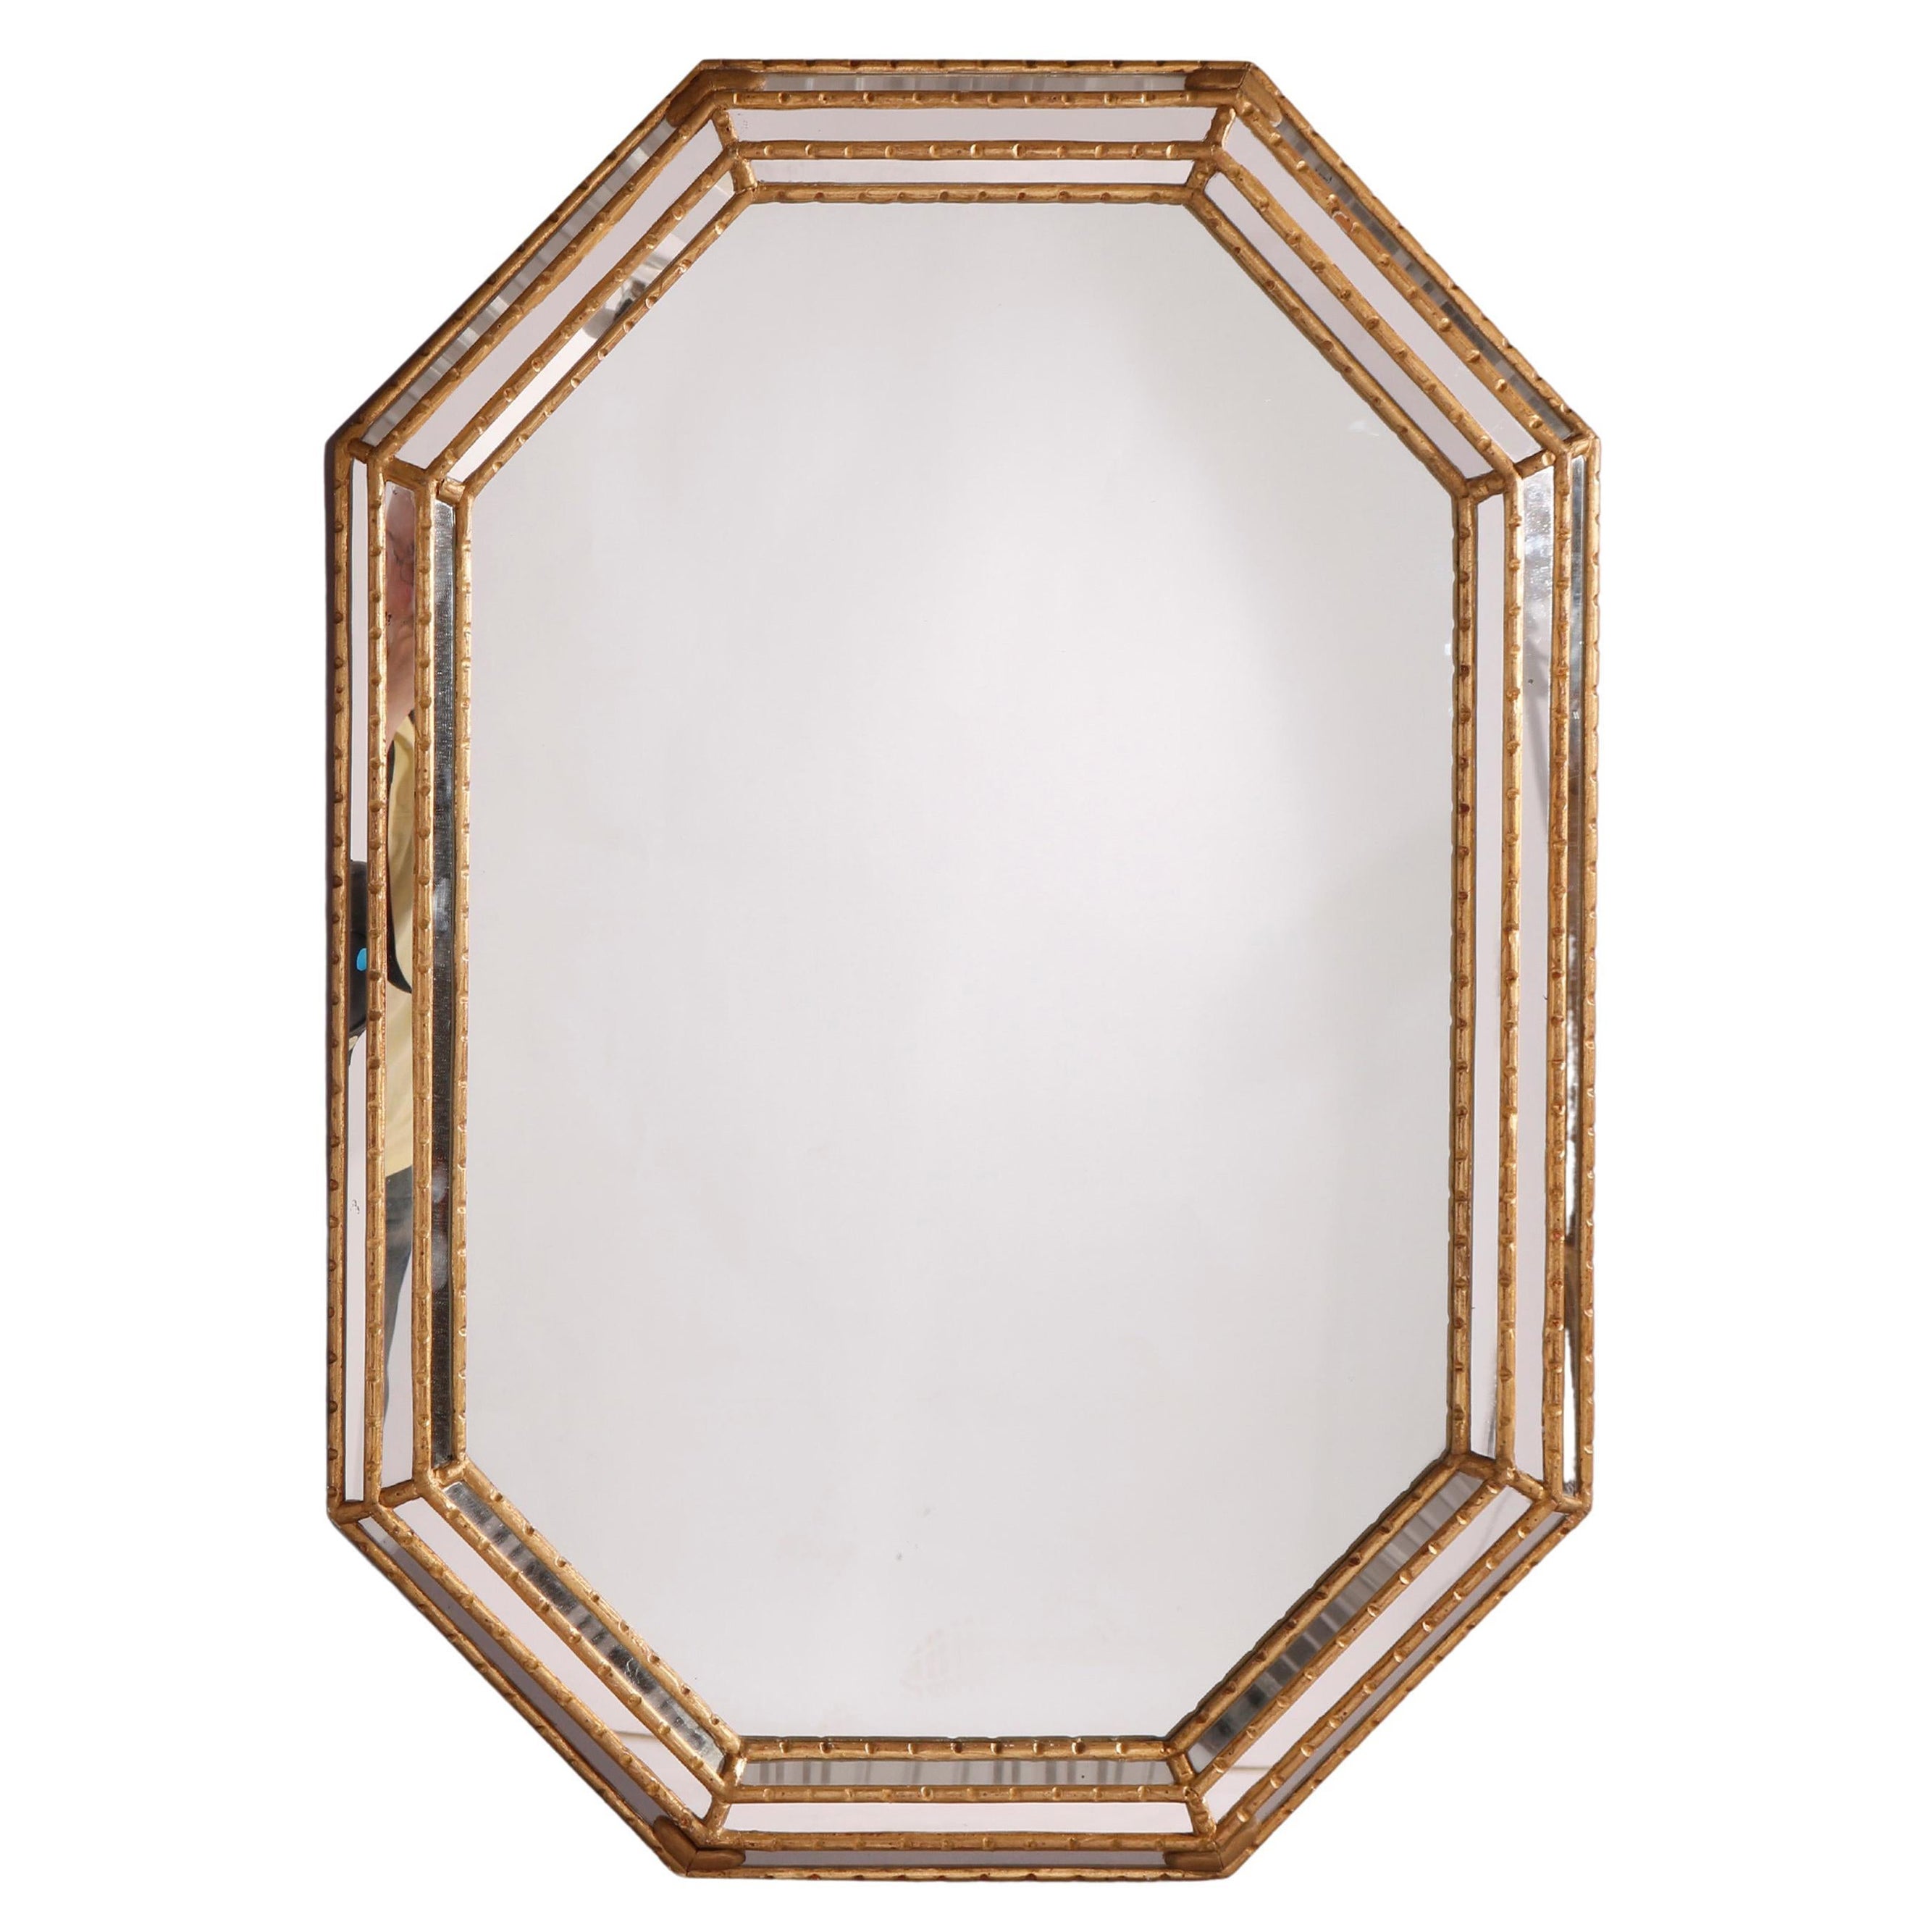 Octagonal Giltwood Parclose Wall Mirror, 20th Century For Sale